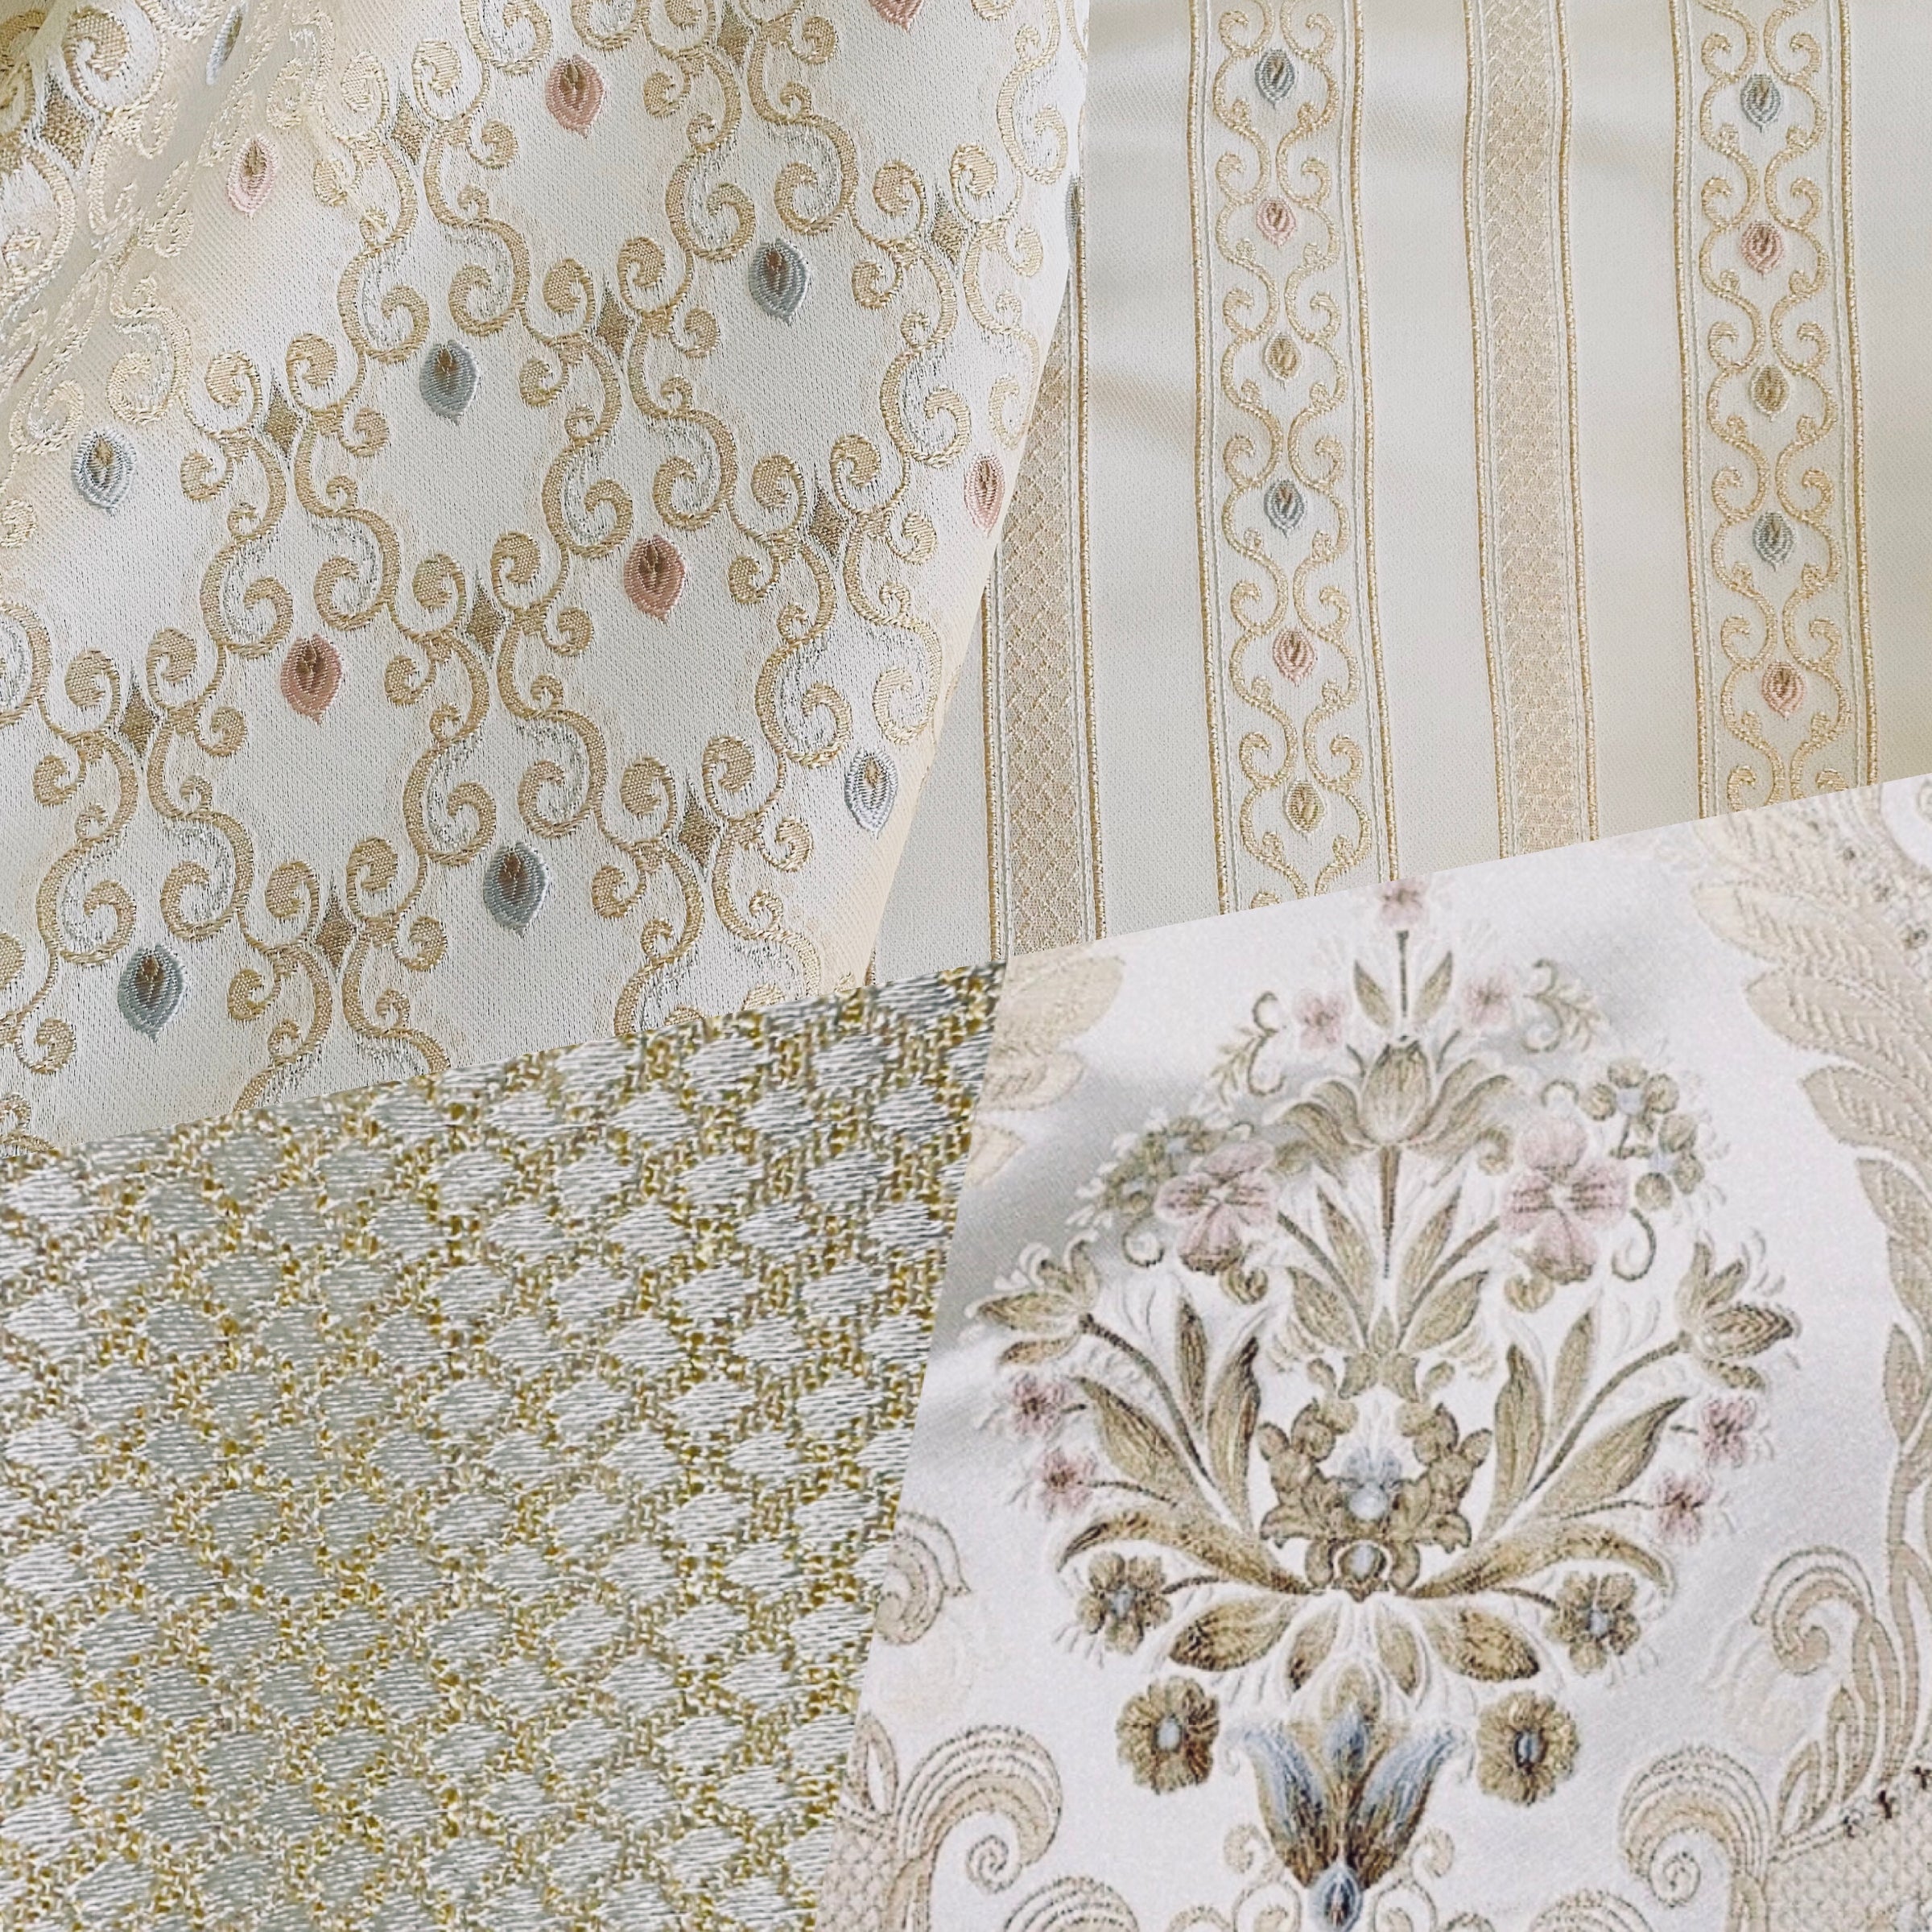 Vintage Damask - Fabric by the yard - White - Prestige Linens